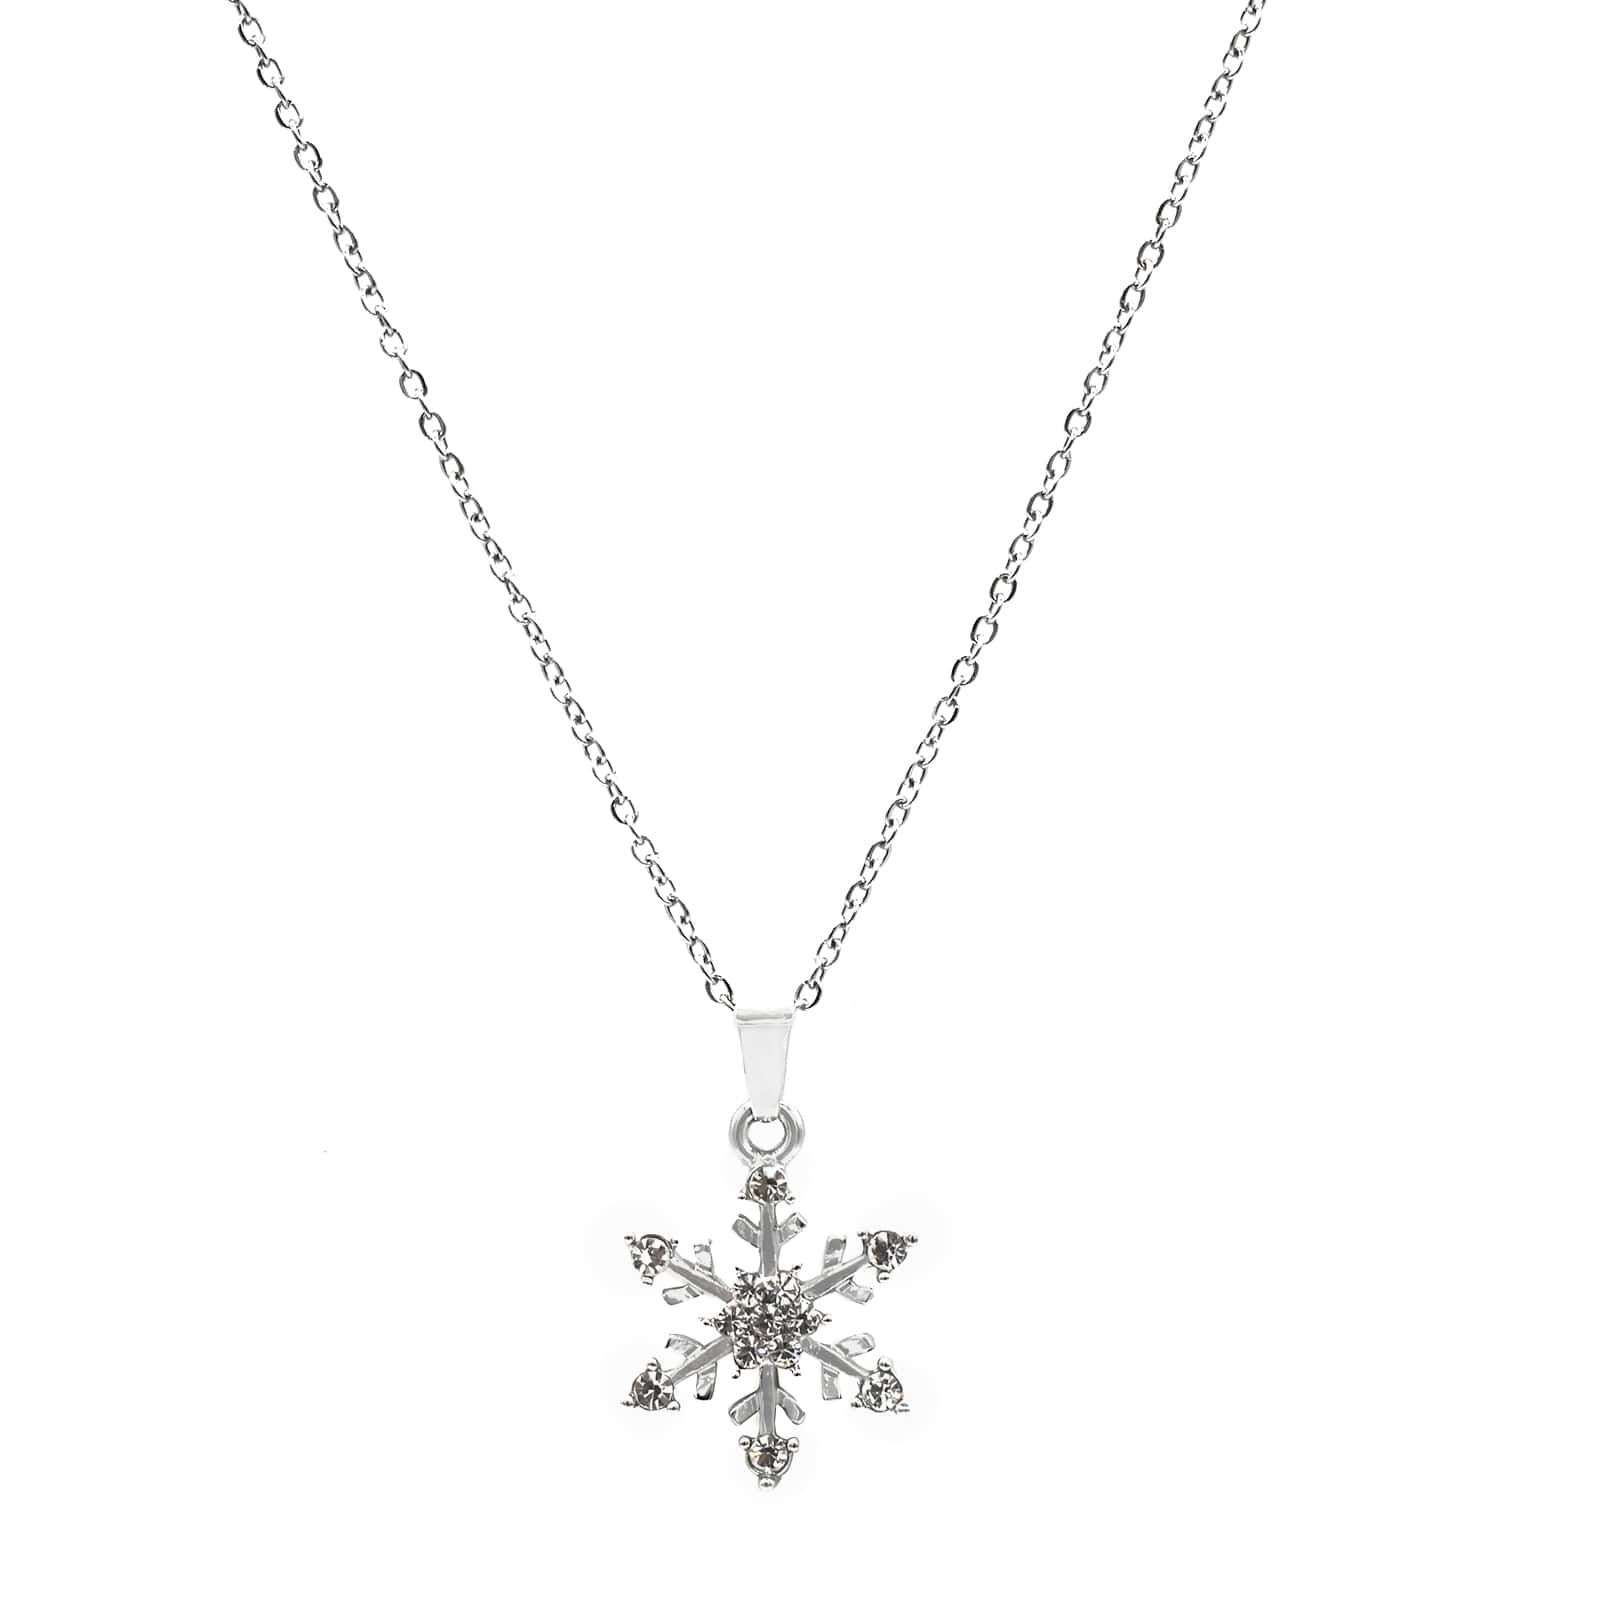 Snowflake Necklace in 925 Sterling Silver Pure and Simple Winter Jewelry  Christmas Gift Silver Snowflake Jewelry Snowflake Items - Etsy